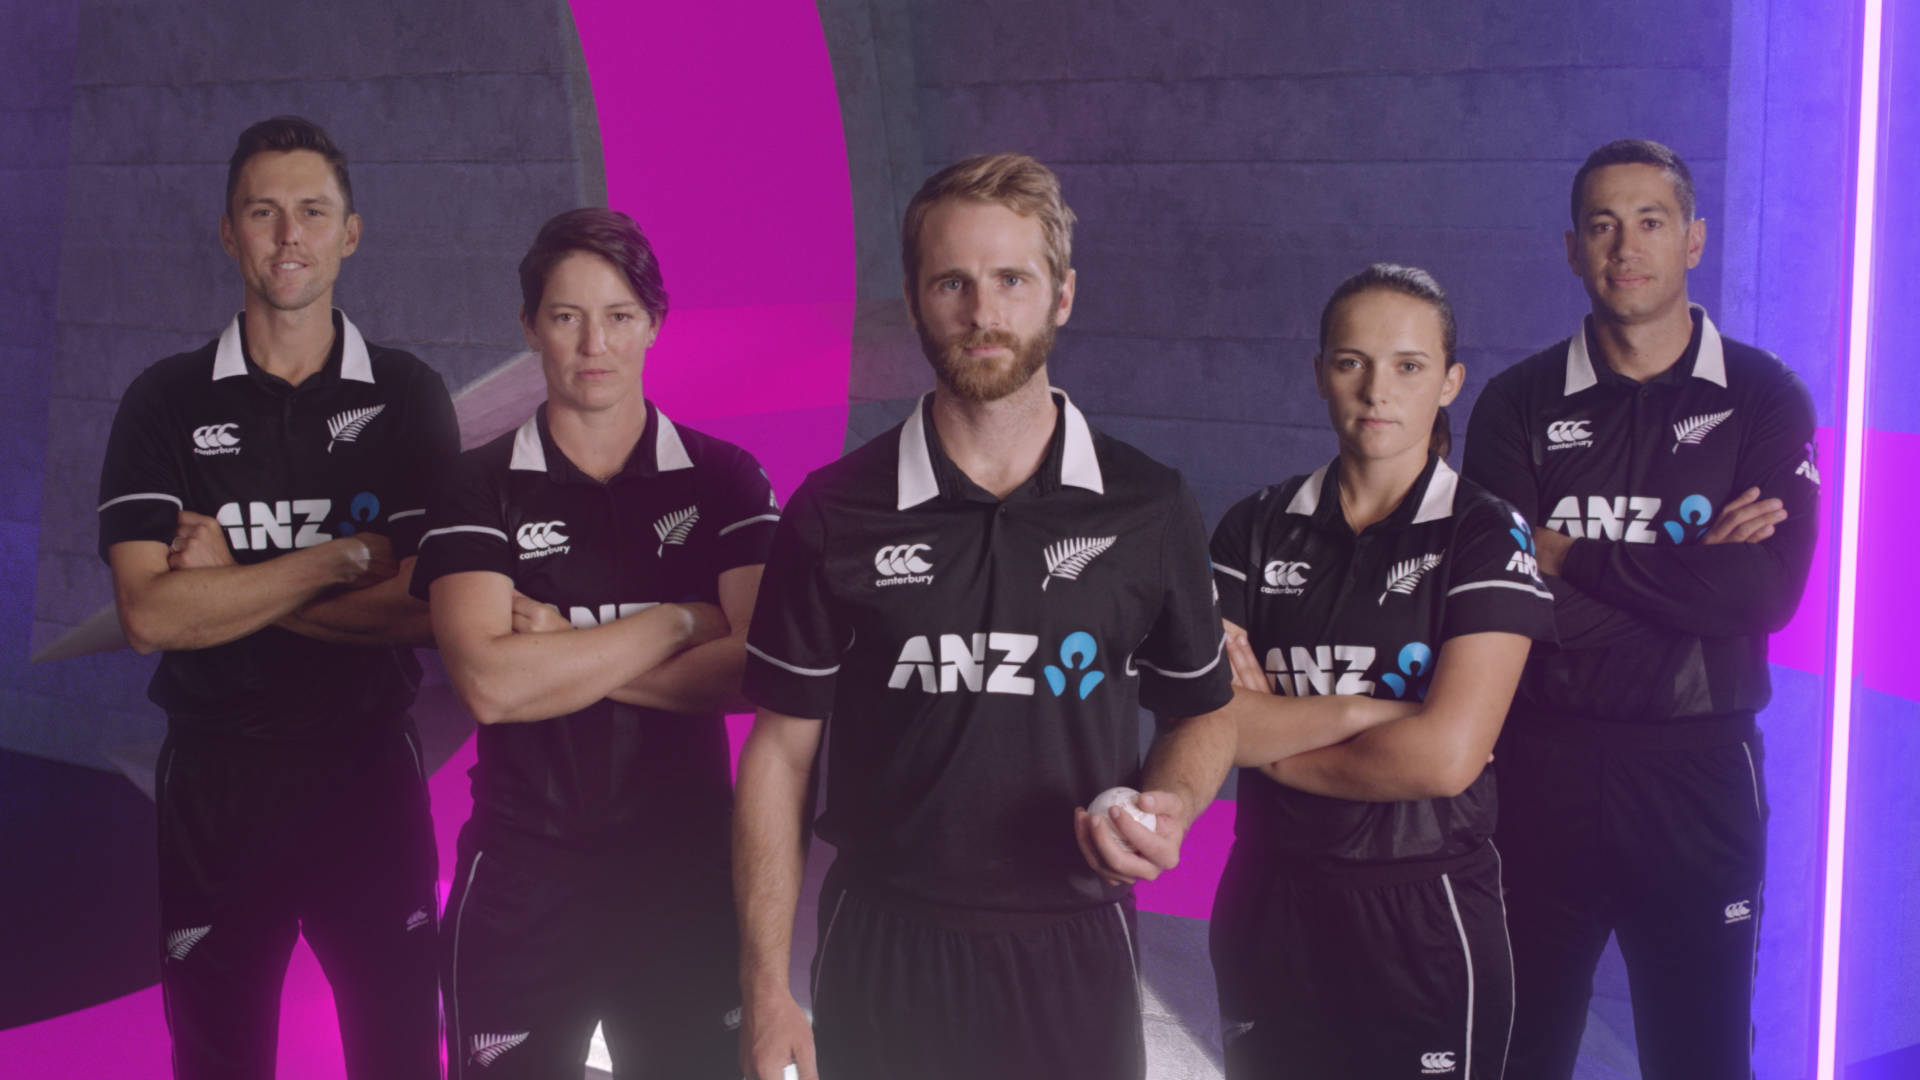 Pride Of Kiwis: The New Zealand Cricket Team In Action Background